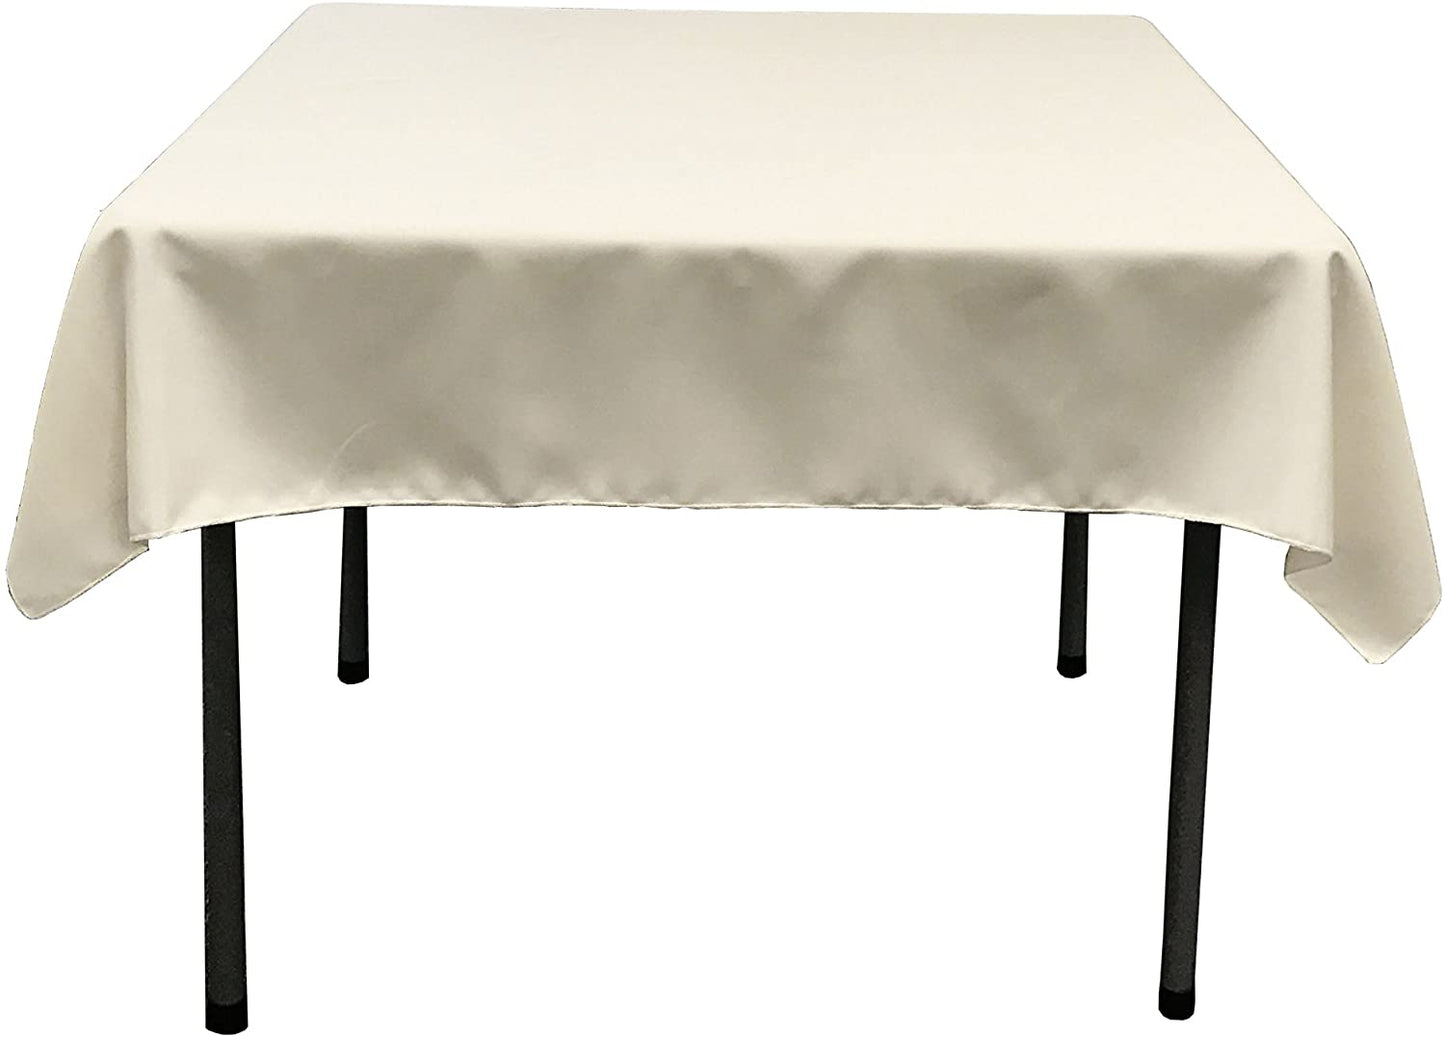 Polyester Poplin Washable Square Tablecloth, Stain and Wrinkle Resistant Table Cover Ivory